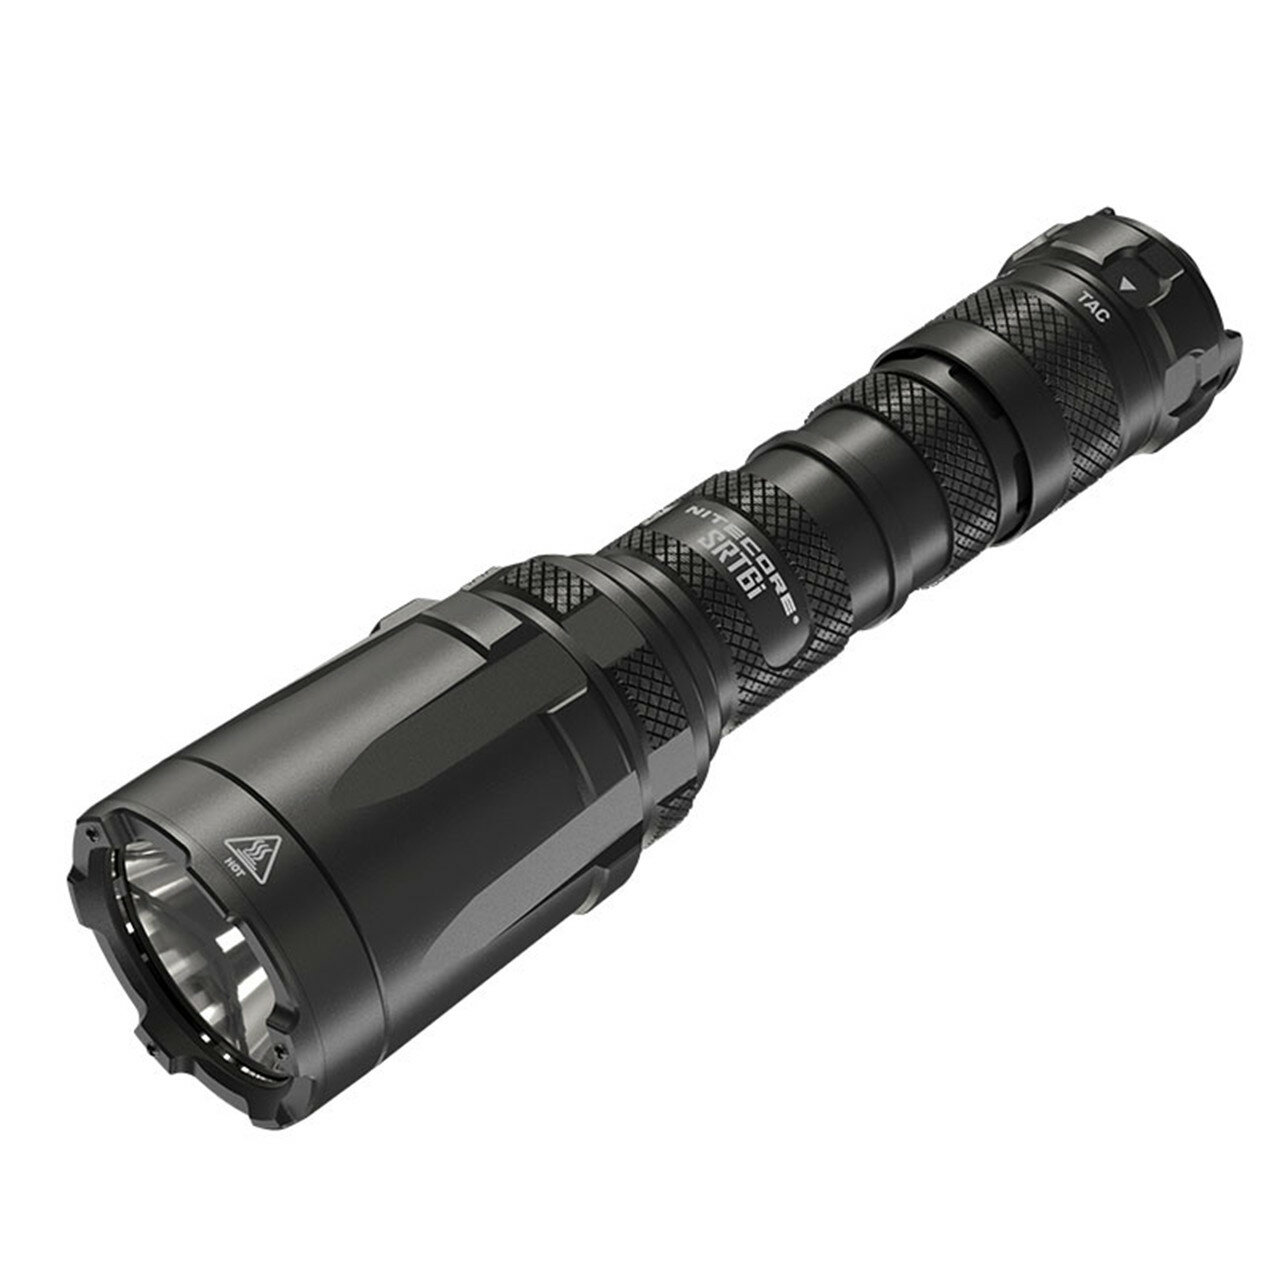 NITECORE SRT6i 2100lm USB Charging Rechargeable LED Flashlight Strong Powerful Tactical Torch Camping Hunting LED Lamp